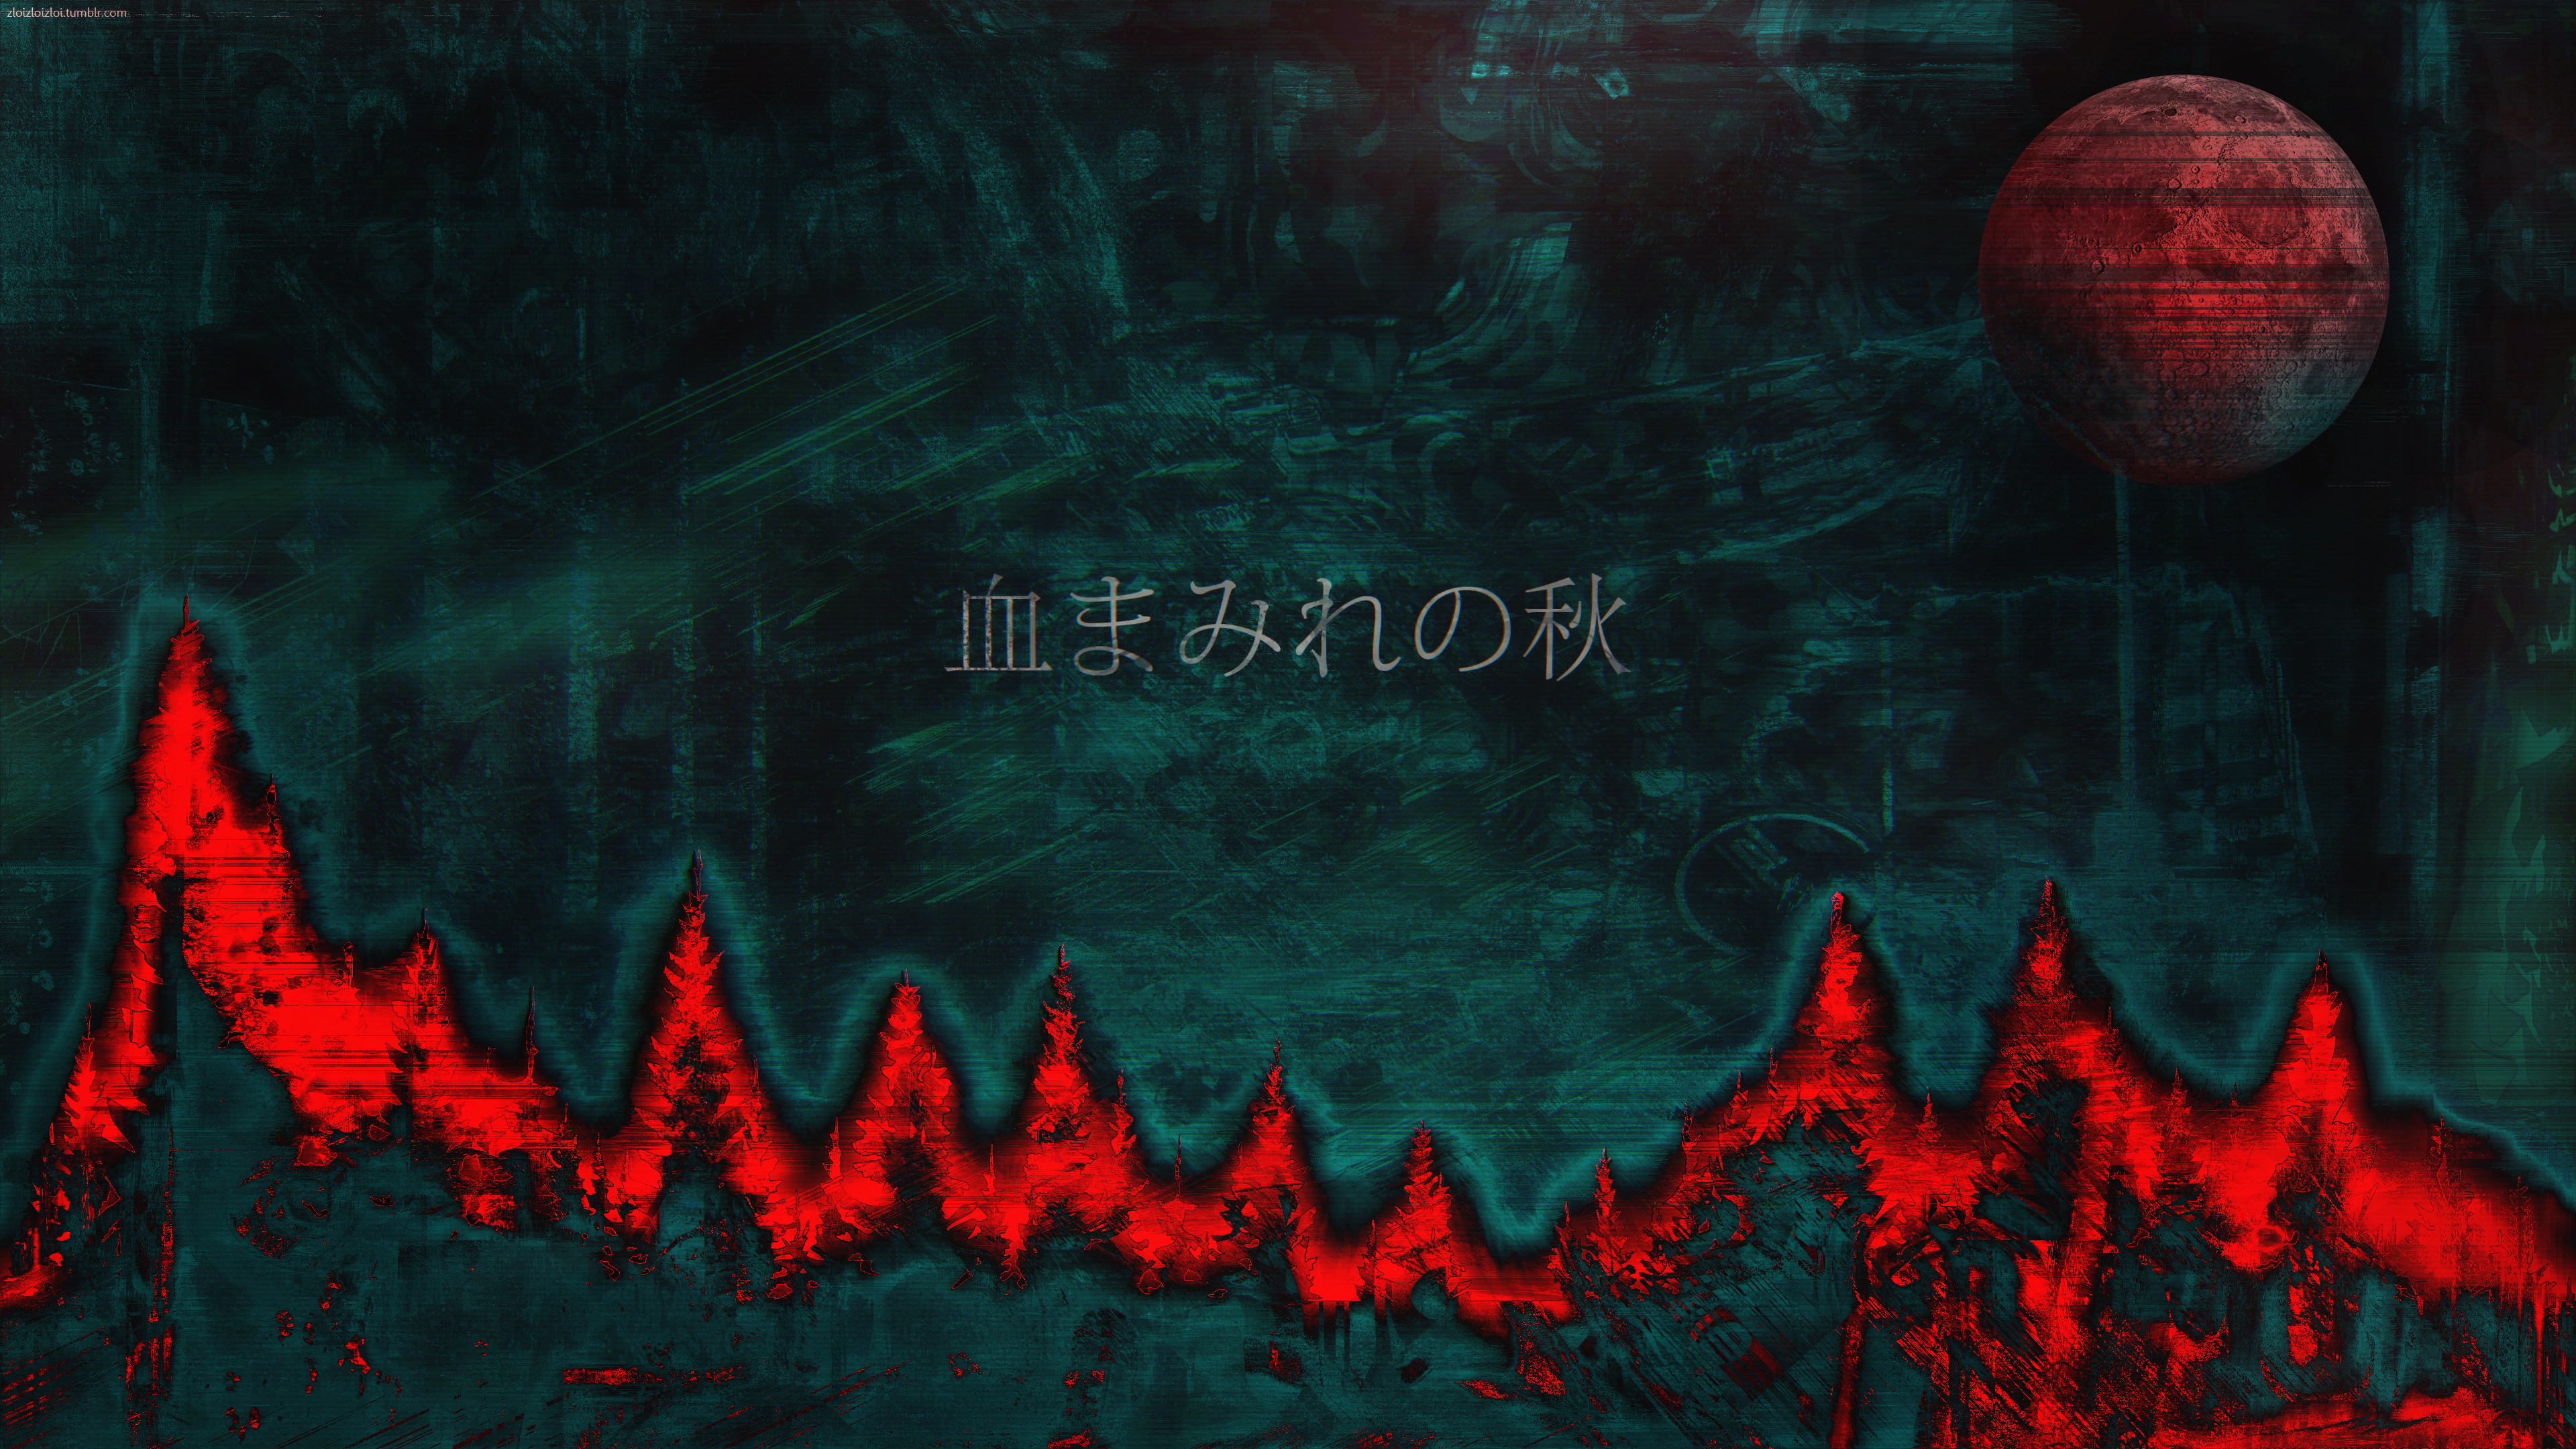 General 3840x2160 glitch art abstract red Moon forest kanji Japanese